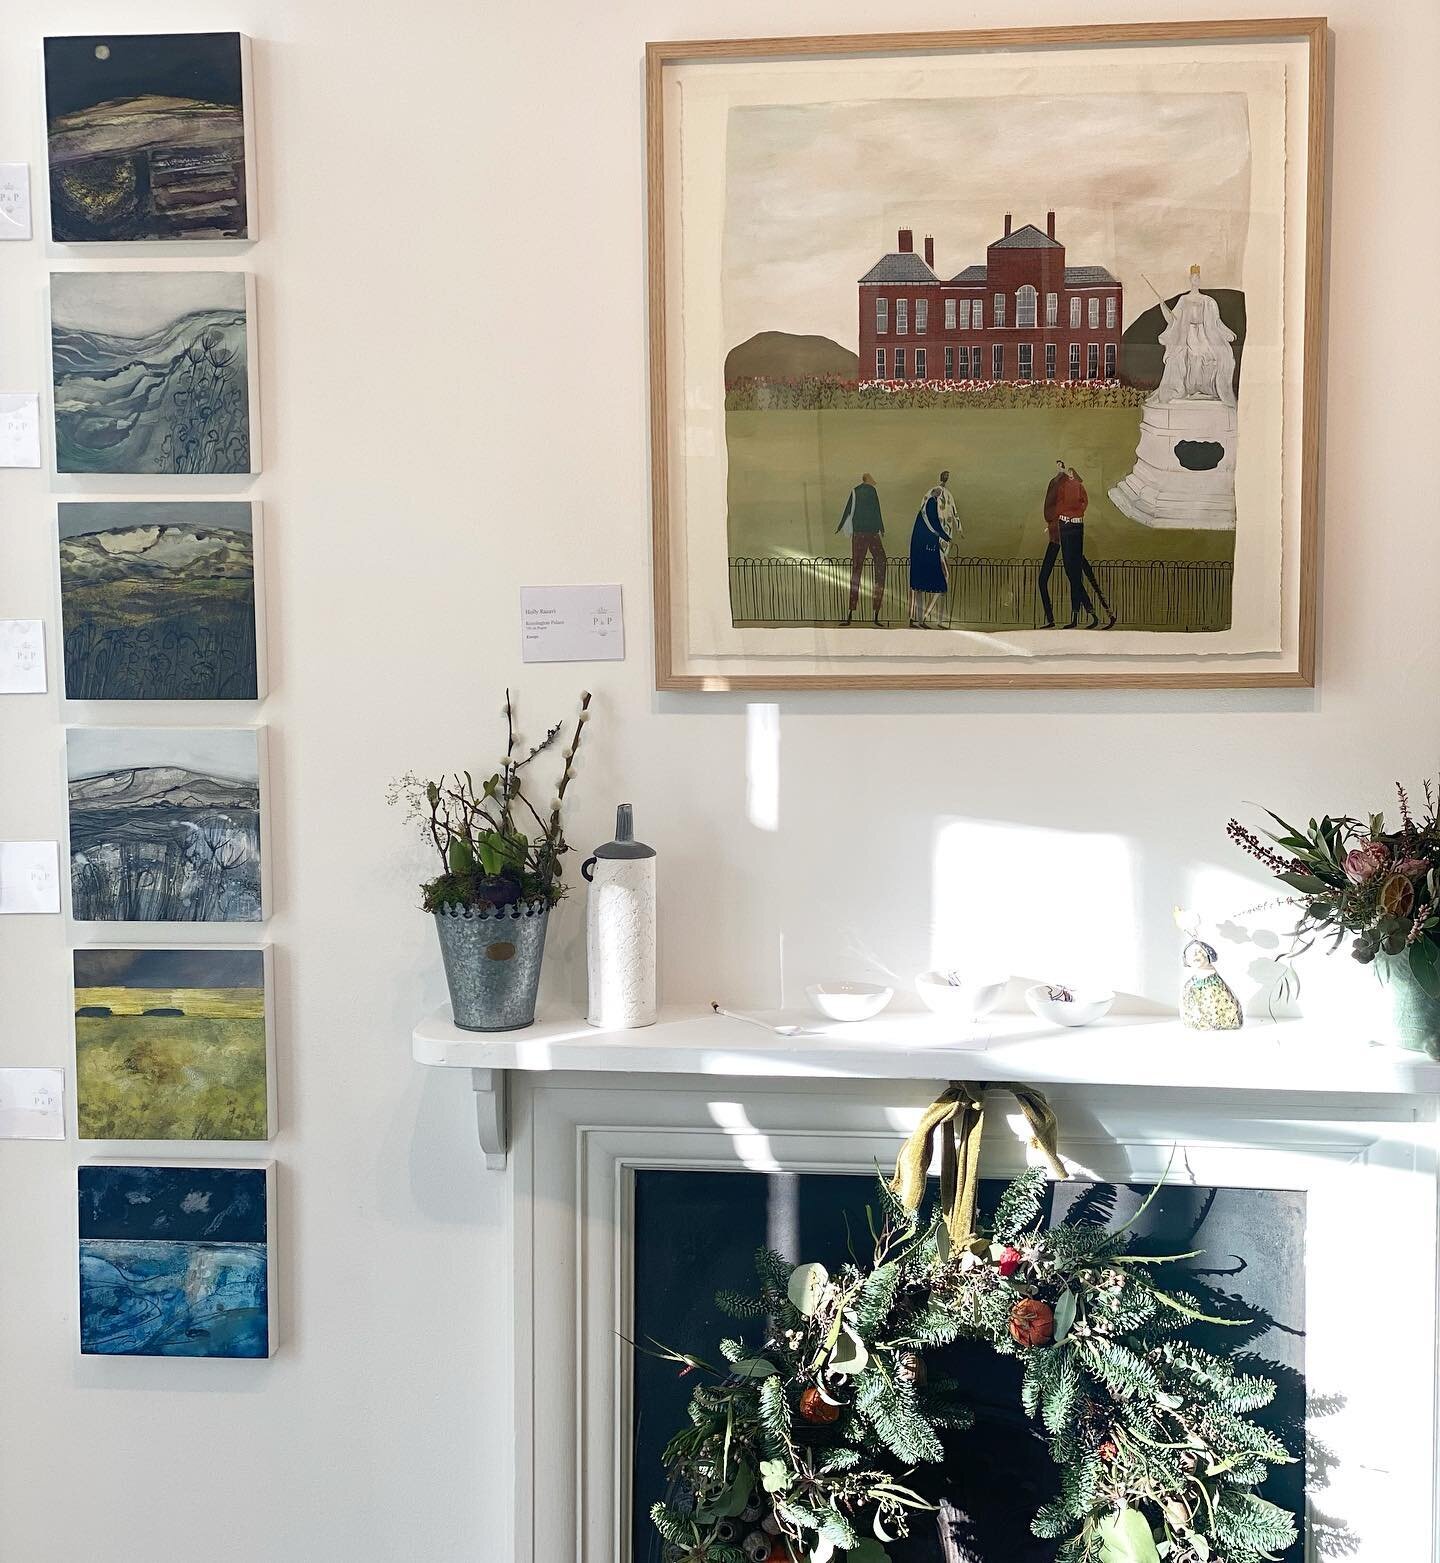 Only a few more days left of A Christmas Pop Up! We have been overwhelmed by the warm welcome we have received here on Richmond Hill and are very excited about operating from no.82 permanently in the future!
There is still time to see the exhibition;